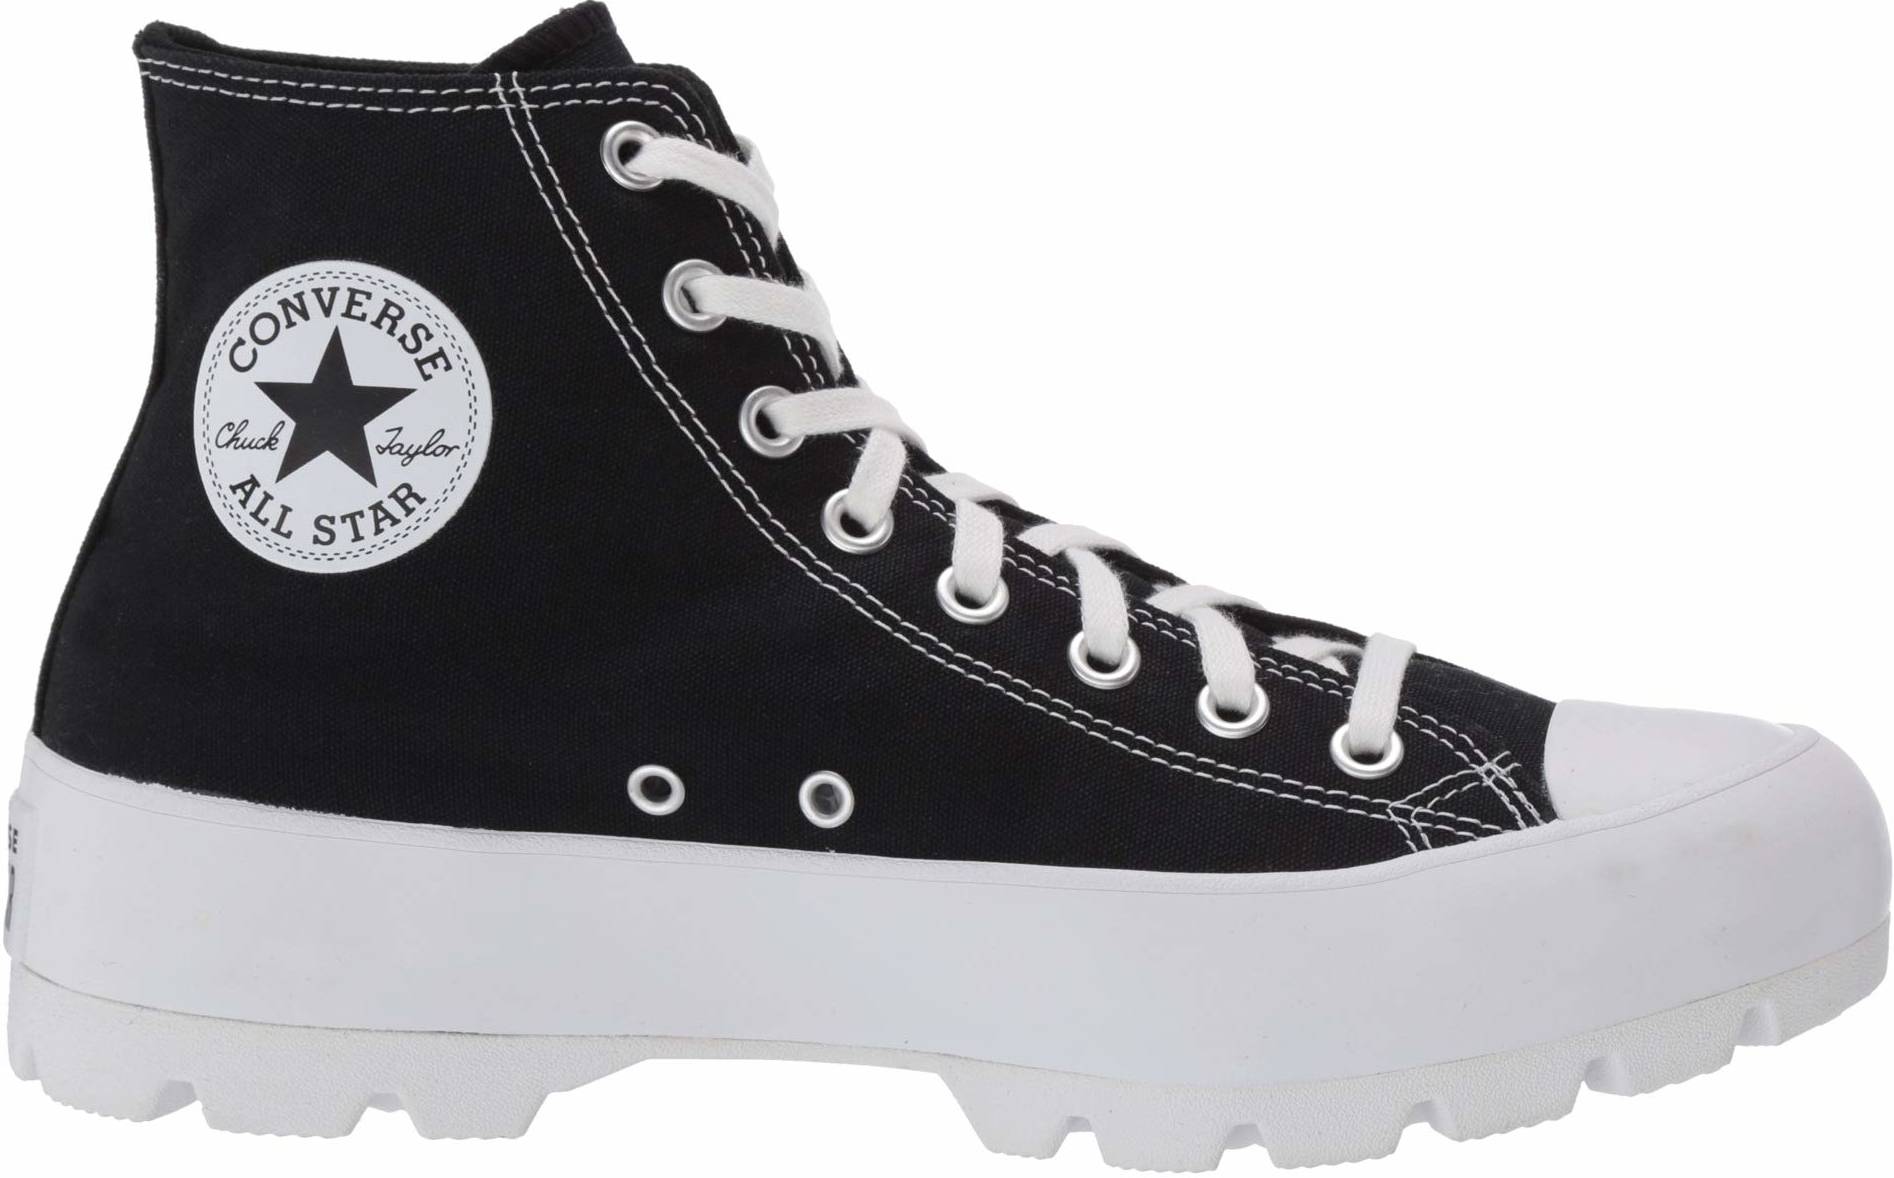 $100 + Review of Converse Chuck Taylor 